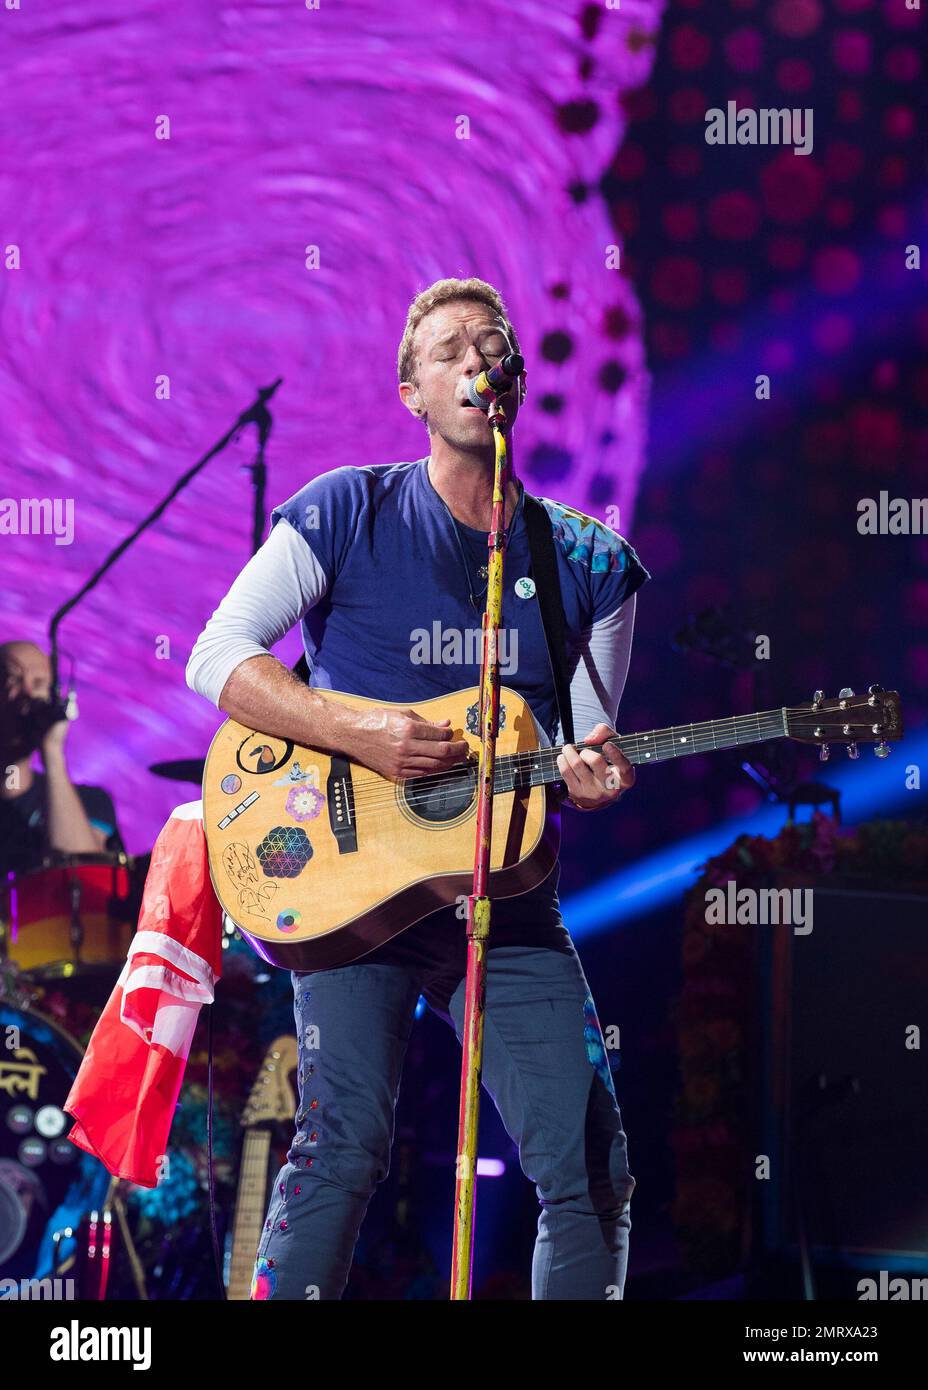 Chris Martin of Coldplay performs onstage at the Rogers Centre on Monday, August 21, 2017 in Toronto, Canada. (Photo by Arthur Mola/Invision/AP) Stock Photo